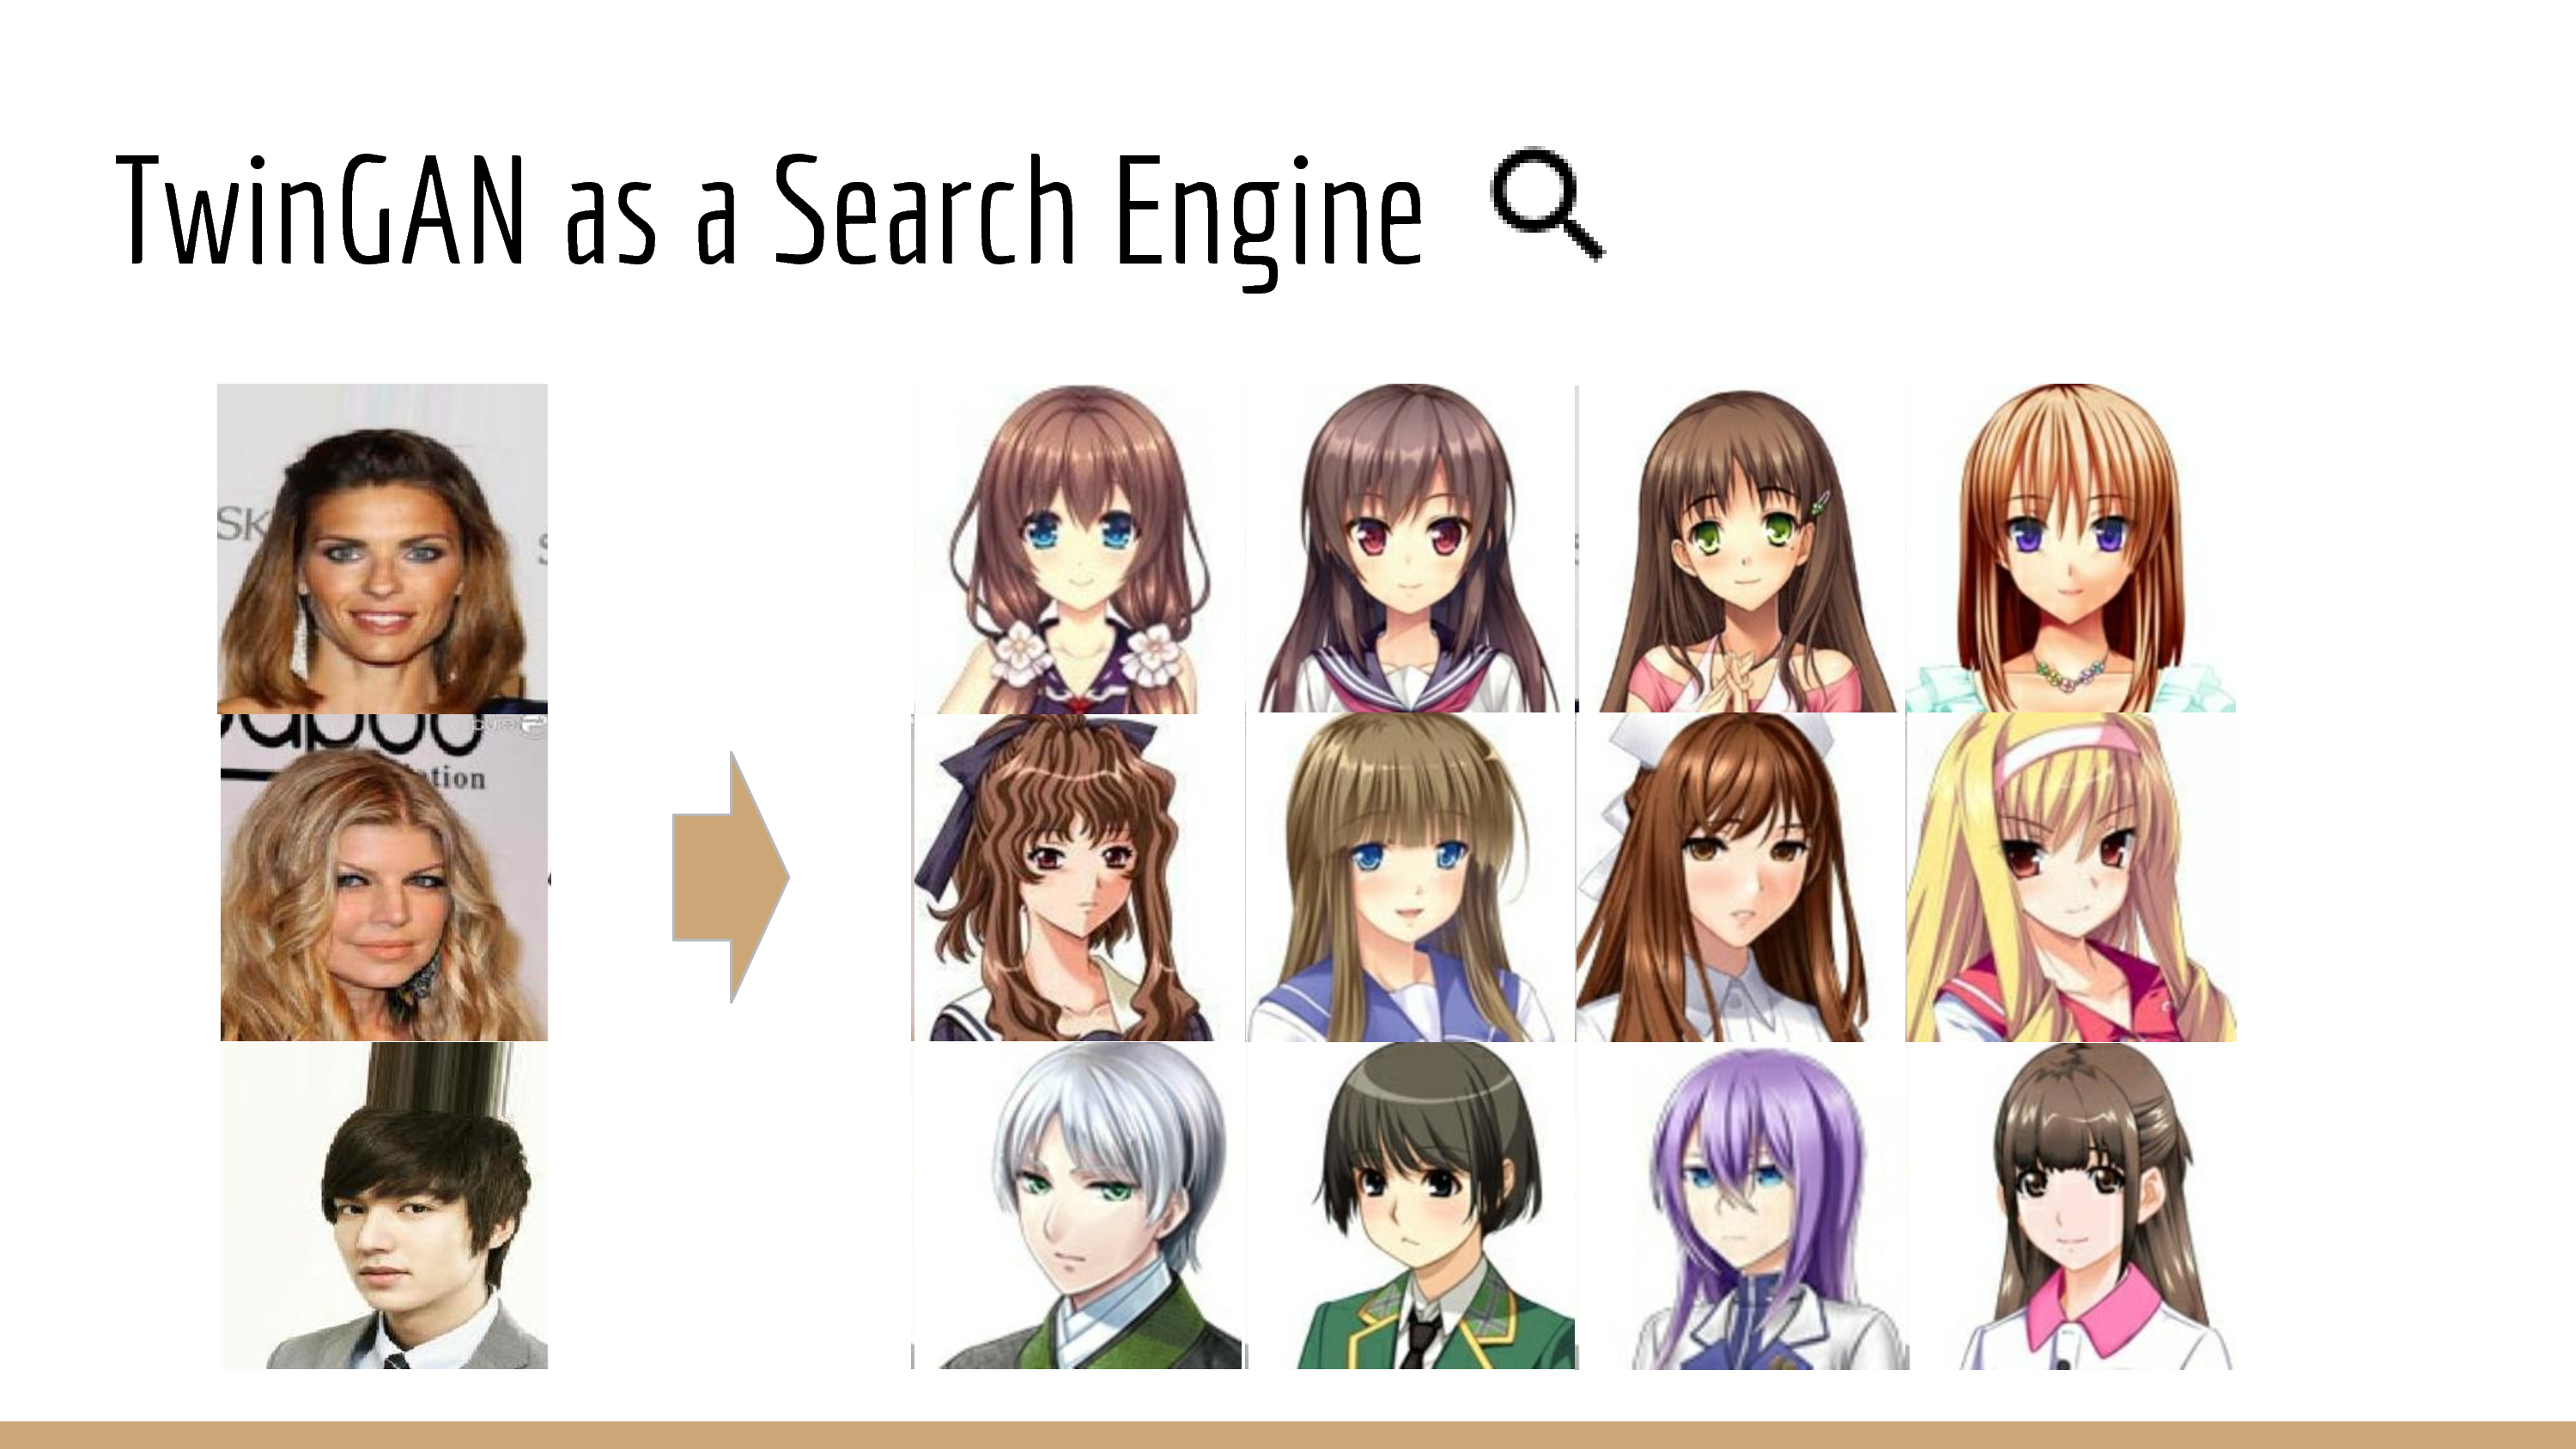 search_engine